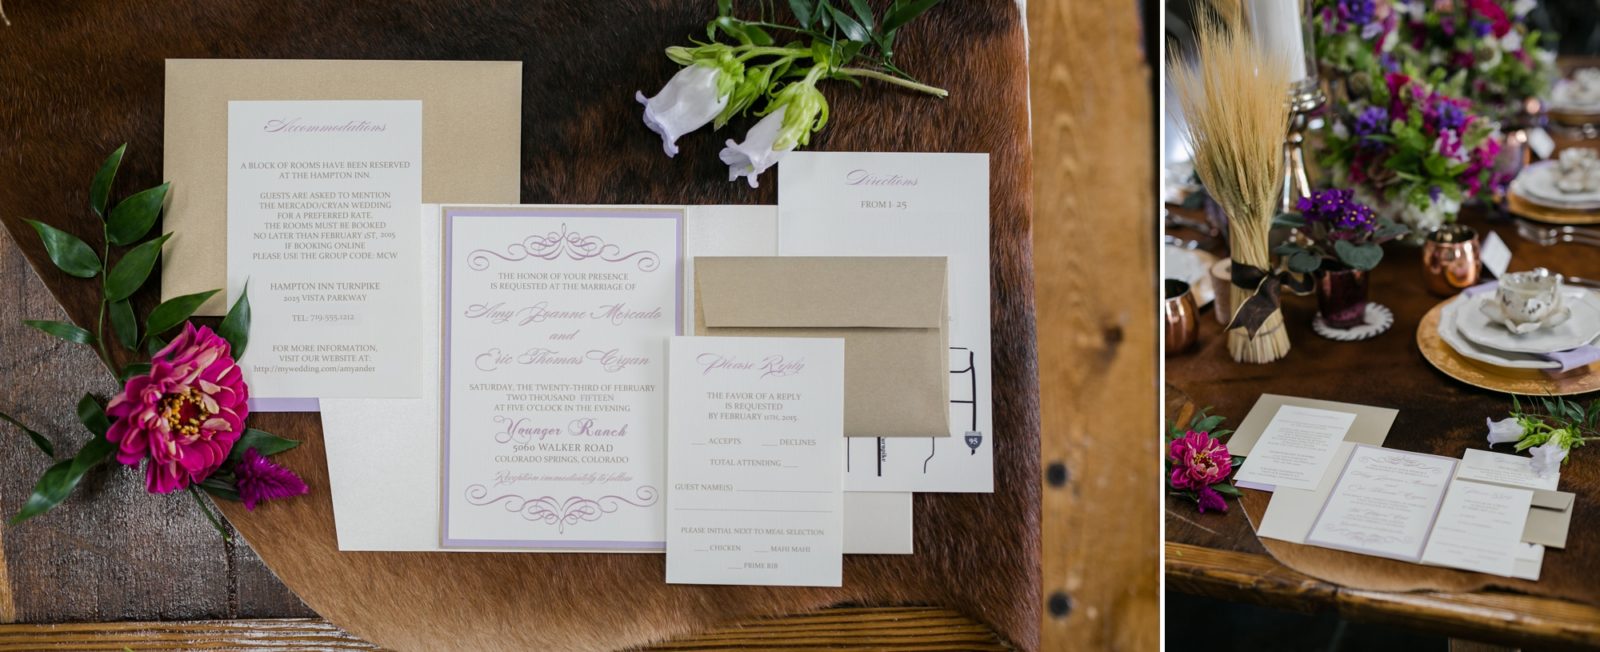 country invitations for barn wedding